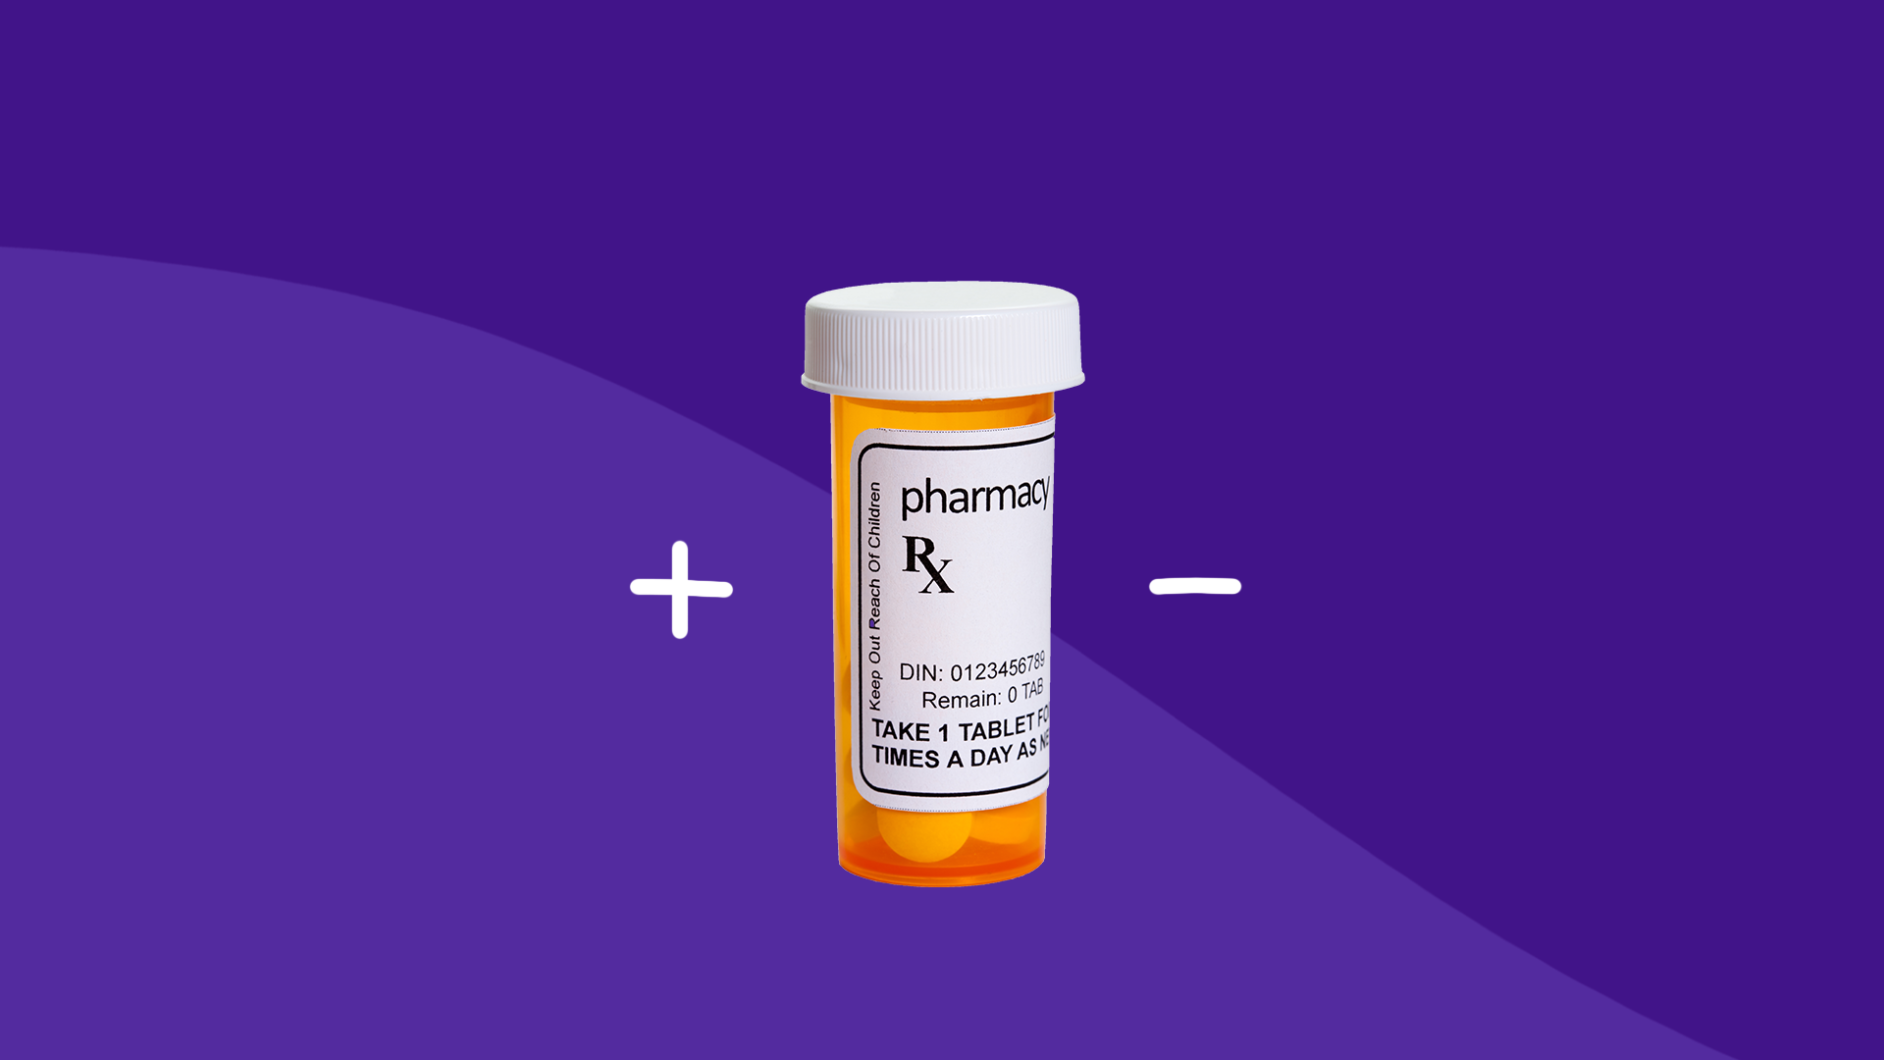 A pill bottle with a plus or minus represents the nocebo effect